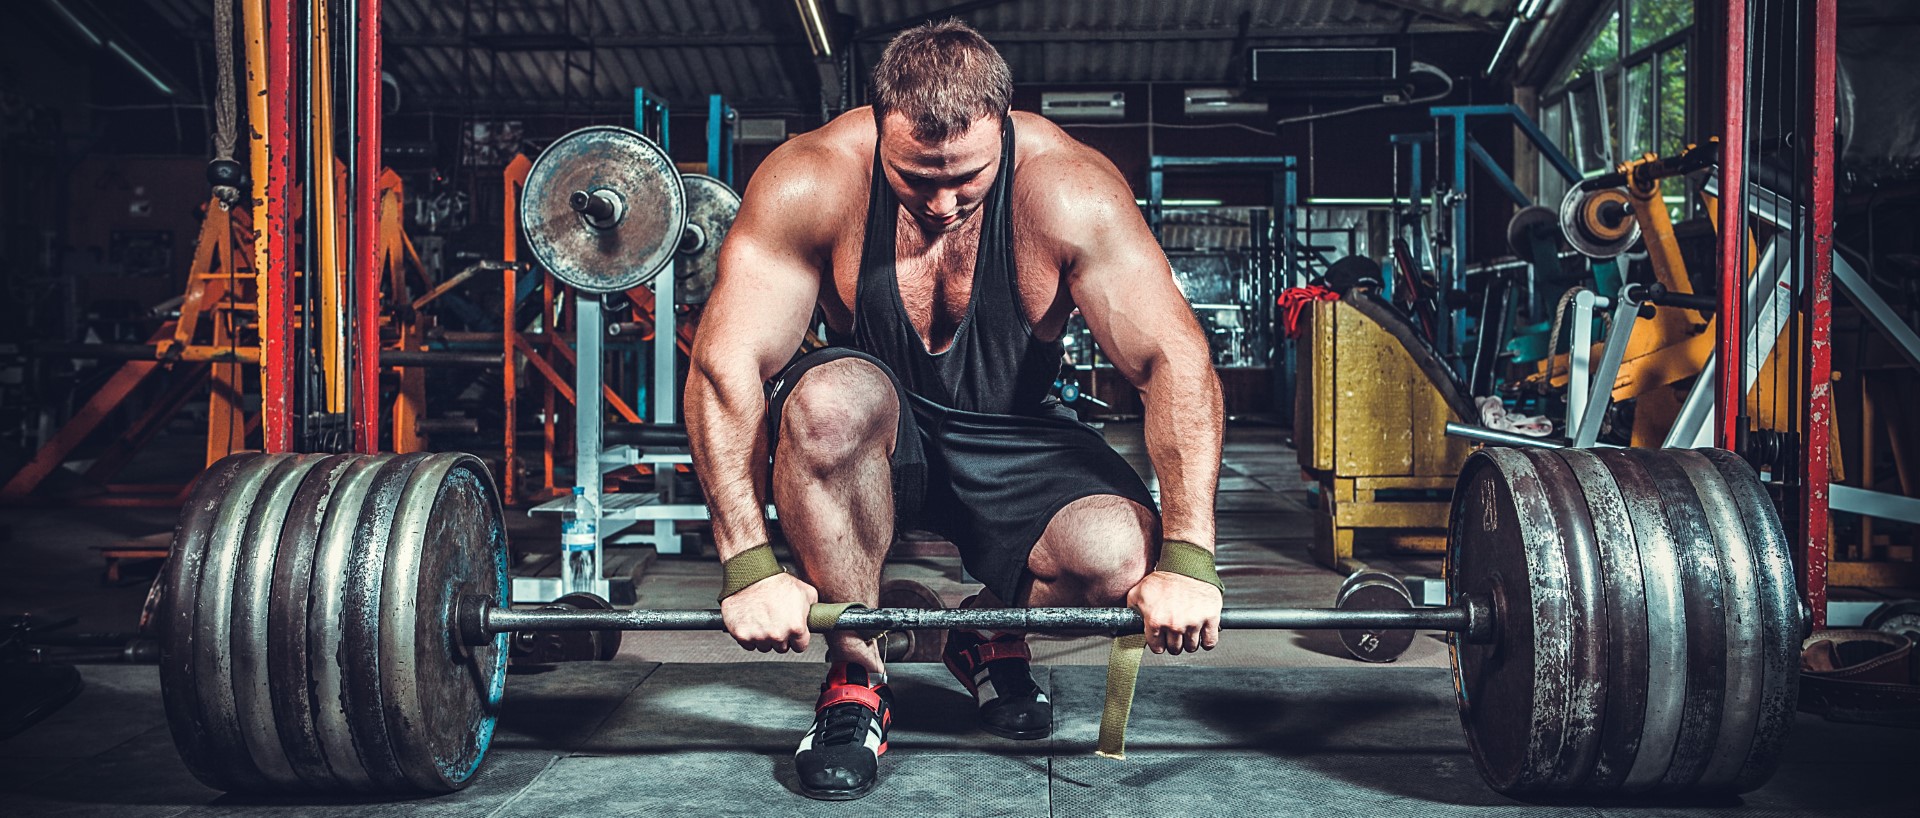 A muscular man prepares to dead lift a large amount of weights